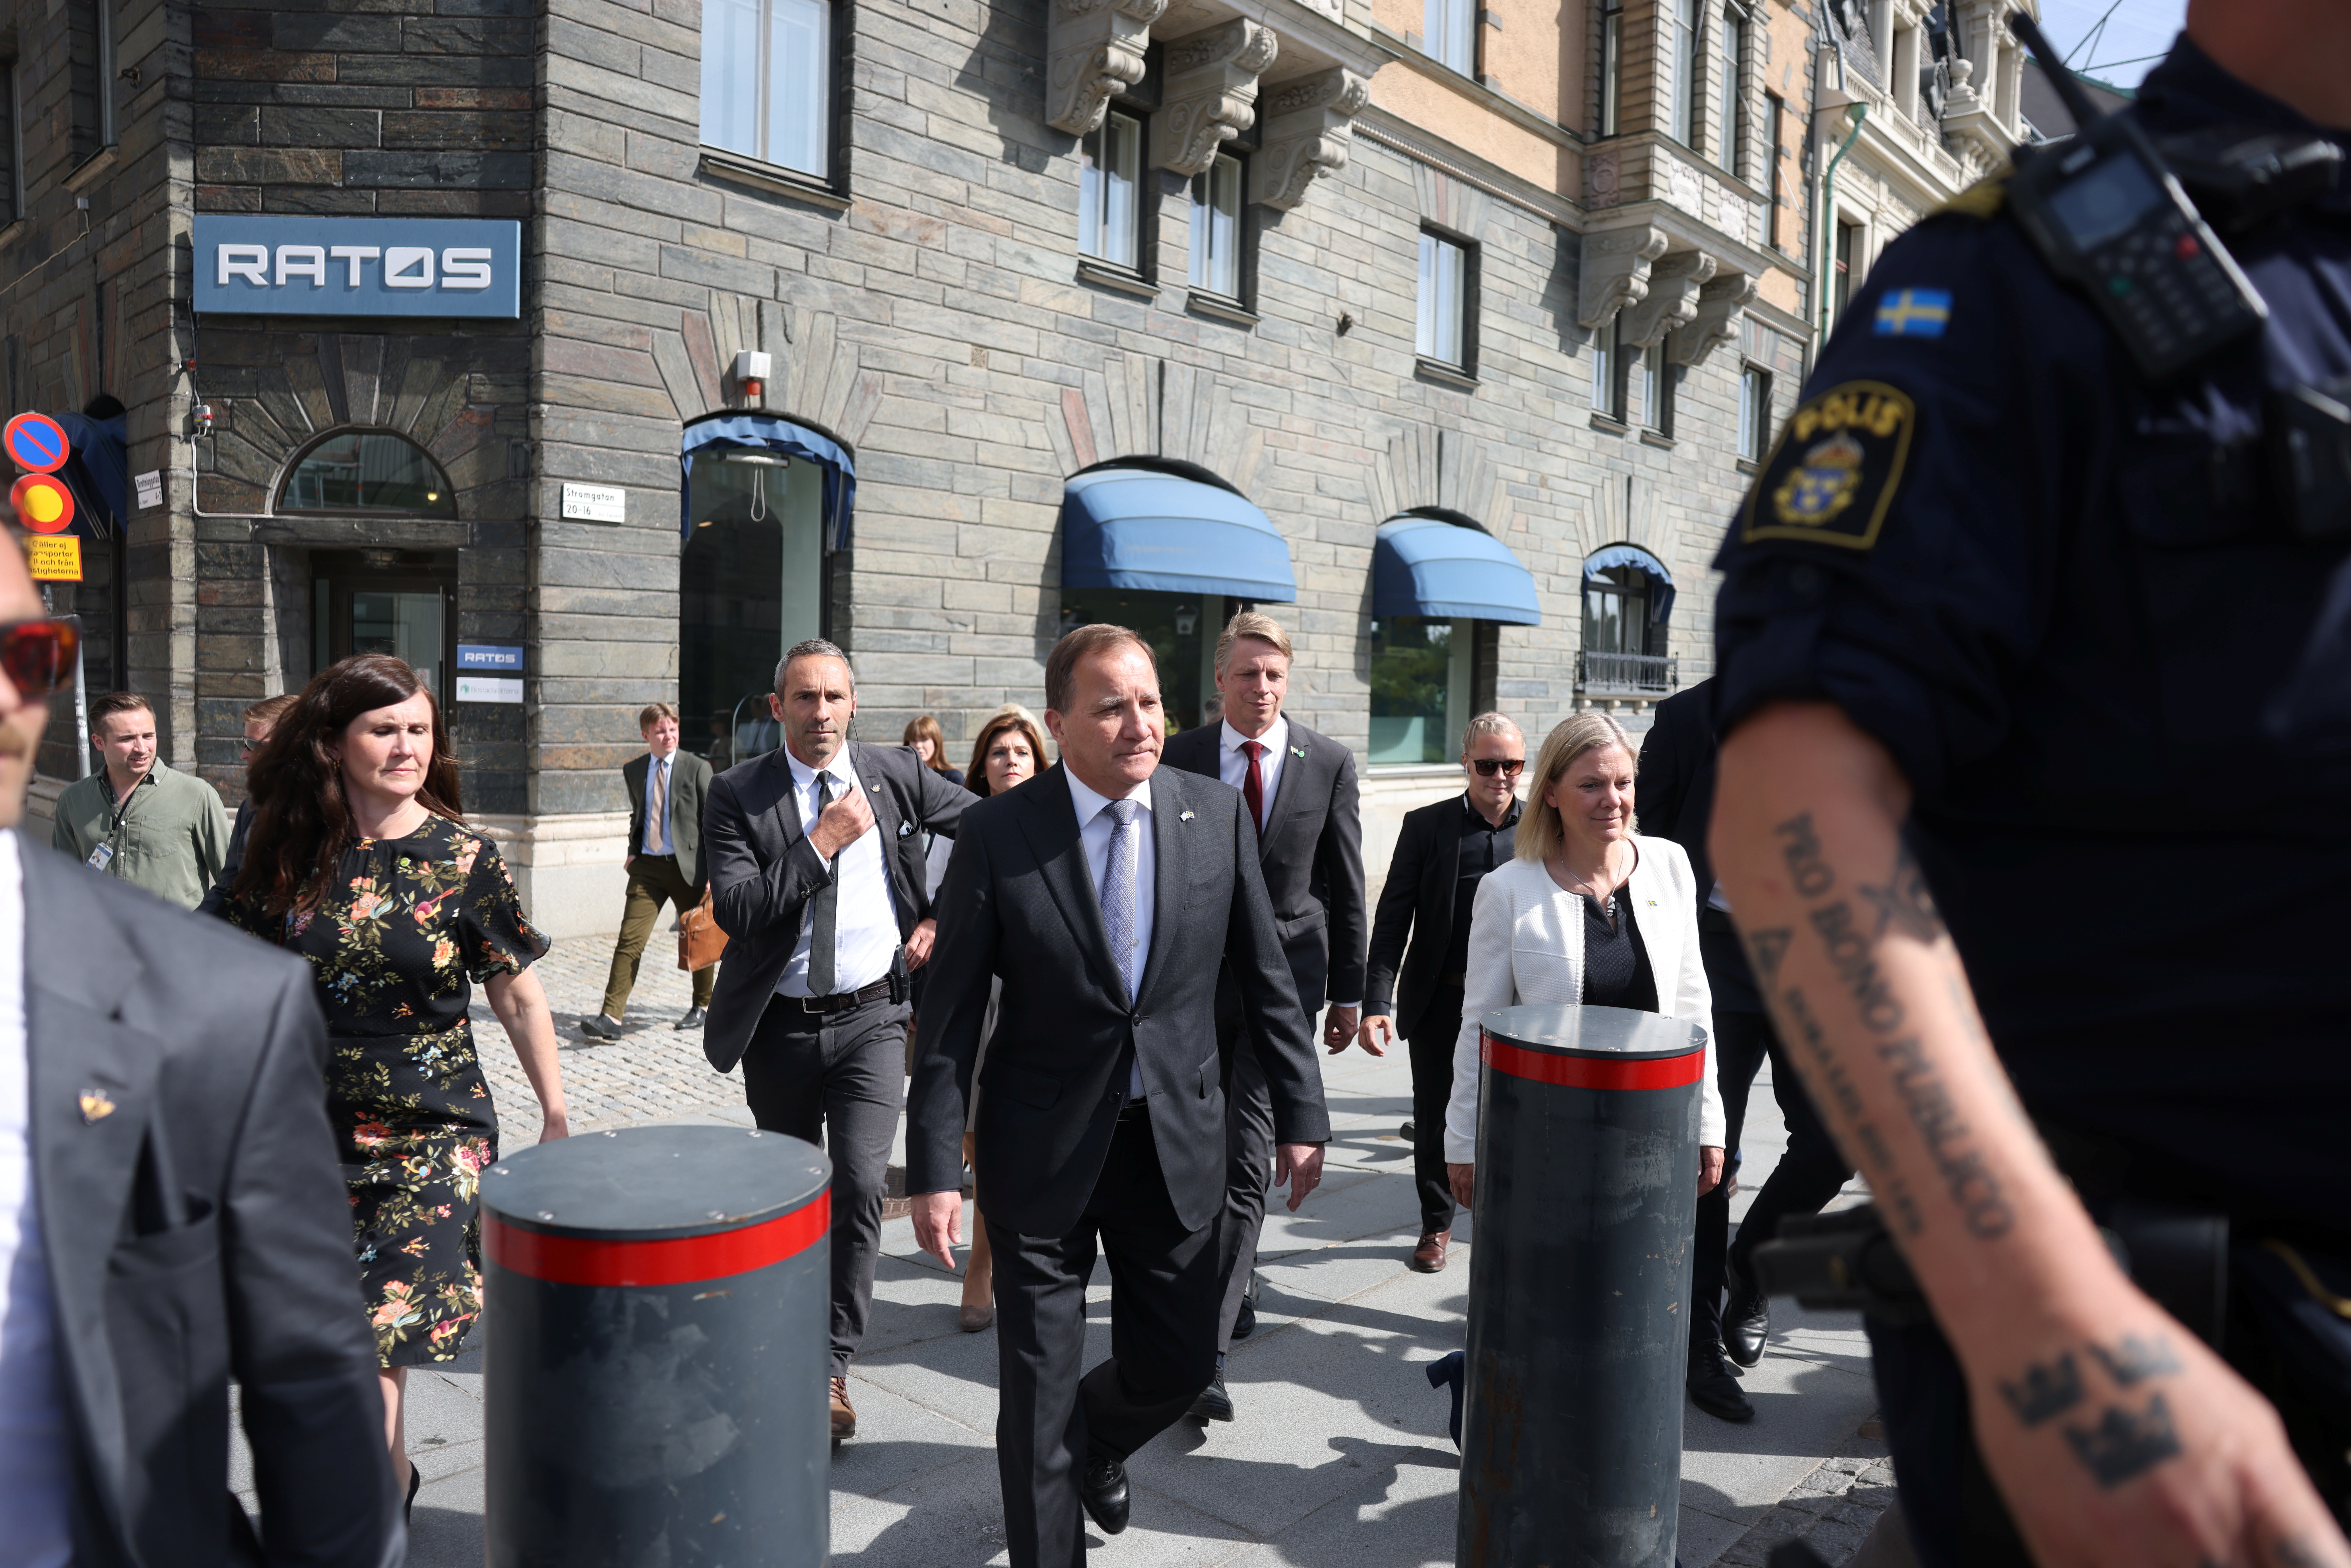 Sweden's Prime Minister Stefan Lofven, Minister for Gender Equality and Housing Marta Stenevi, and Finance Minister Magdalena Andersson arrive to the Swedish parliament building for the no-confidence vote, in Stockholm, Sweden June 21, 2021. TT News Agency/Nils Petter Nilsson via REUTERS  